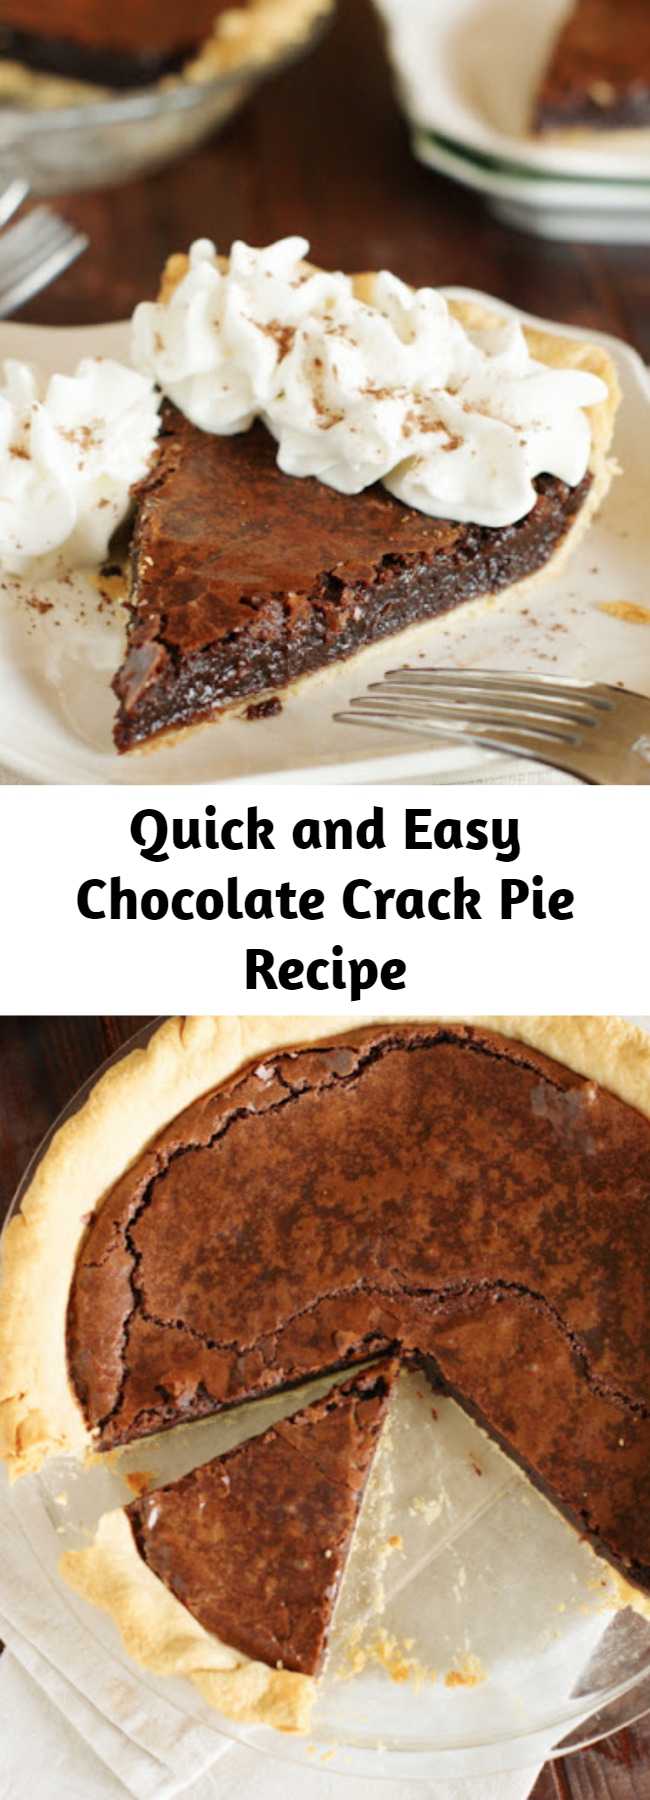 Quick and Easy Chocolate Crack Pie Recipe - When you think Chocolate Crack Pie think amazingly-rich-and-fudgy, addictively delicious, scratch-made gooey brownie ... in a crust. And it truly just doesn't get much better than that.